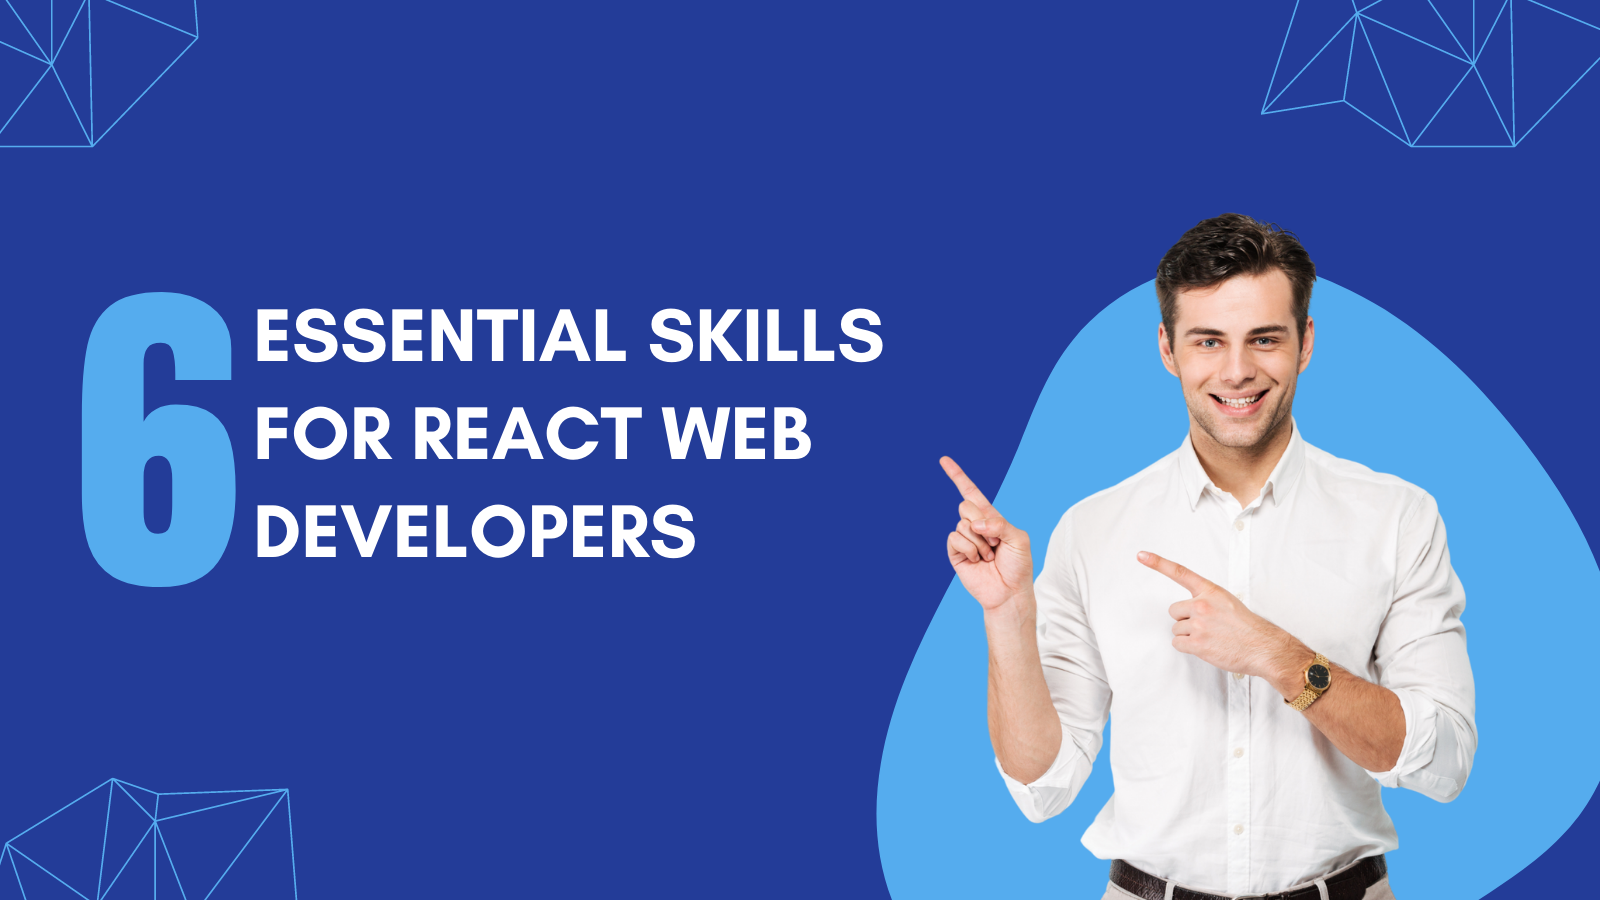 6 Essential Skills for React Web Developers